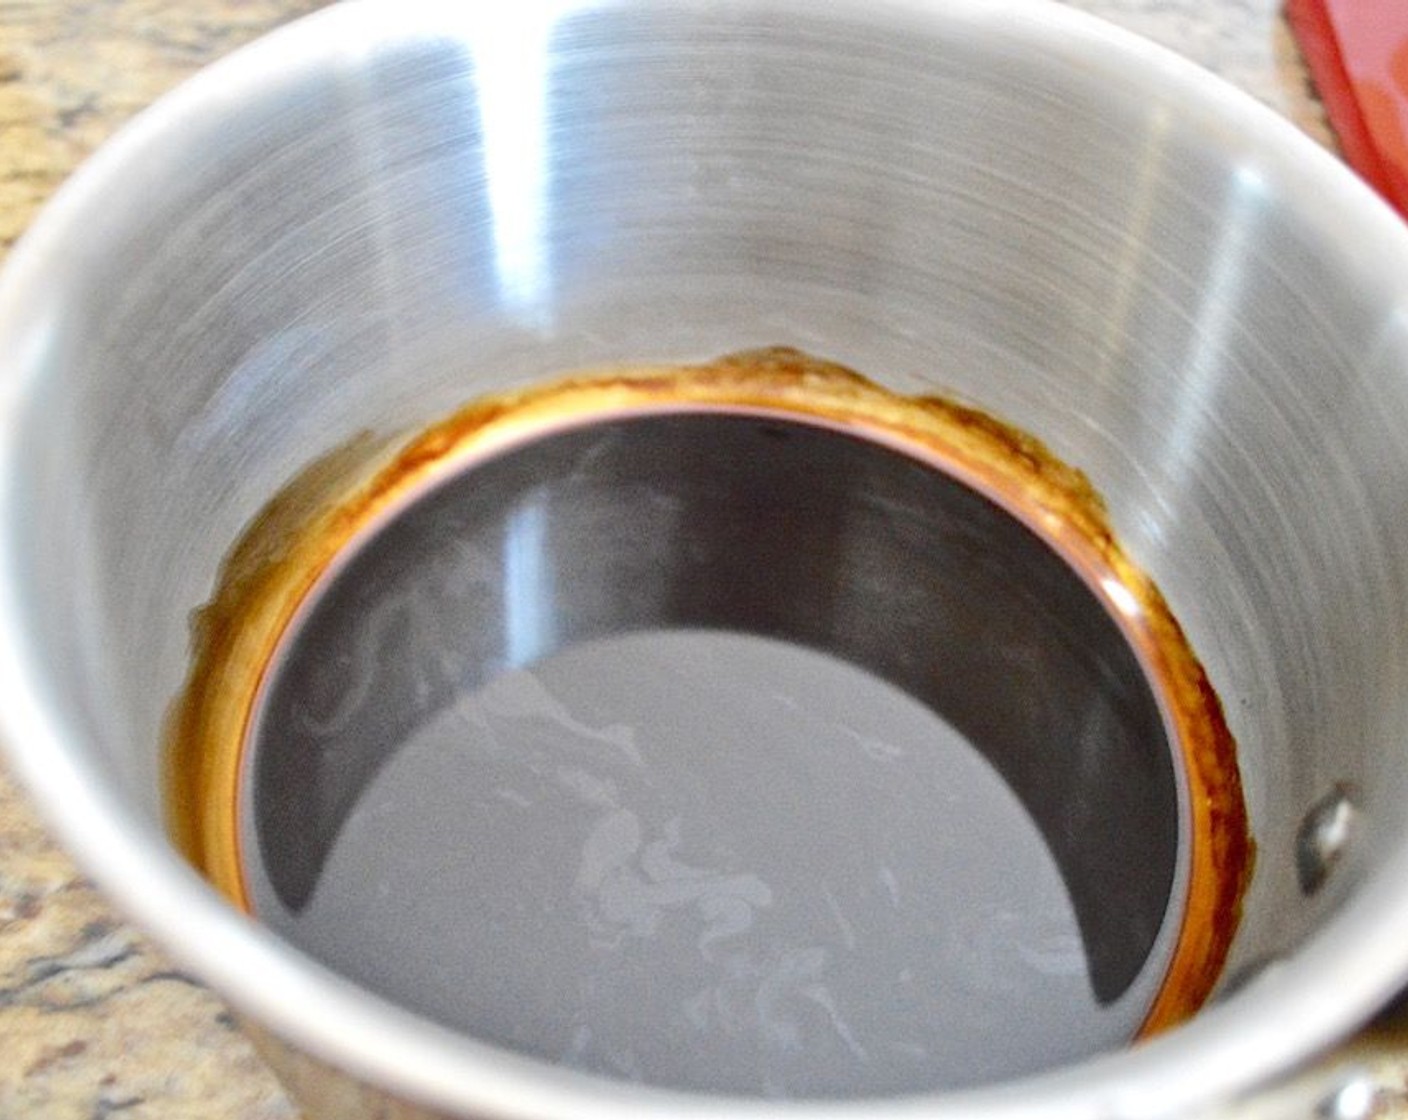 step 2 Bring Water (1/4 cup) to a boil. Stir in the Instant Espresso Powder (2 Tbsp) and let it dissolve in while you keep stirring for a minute. Take off the heat and let cool.